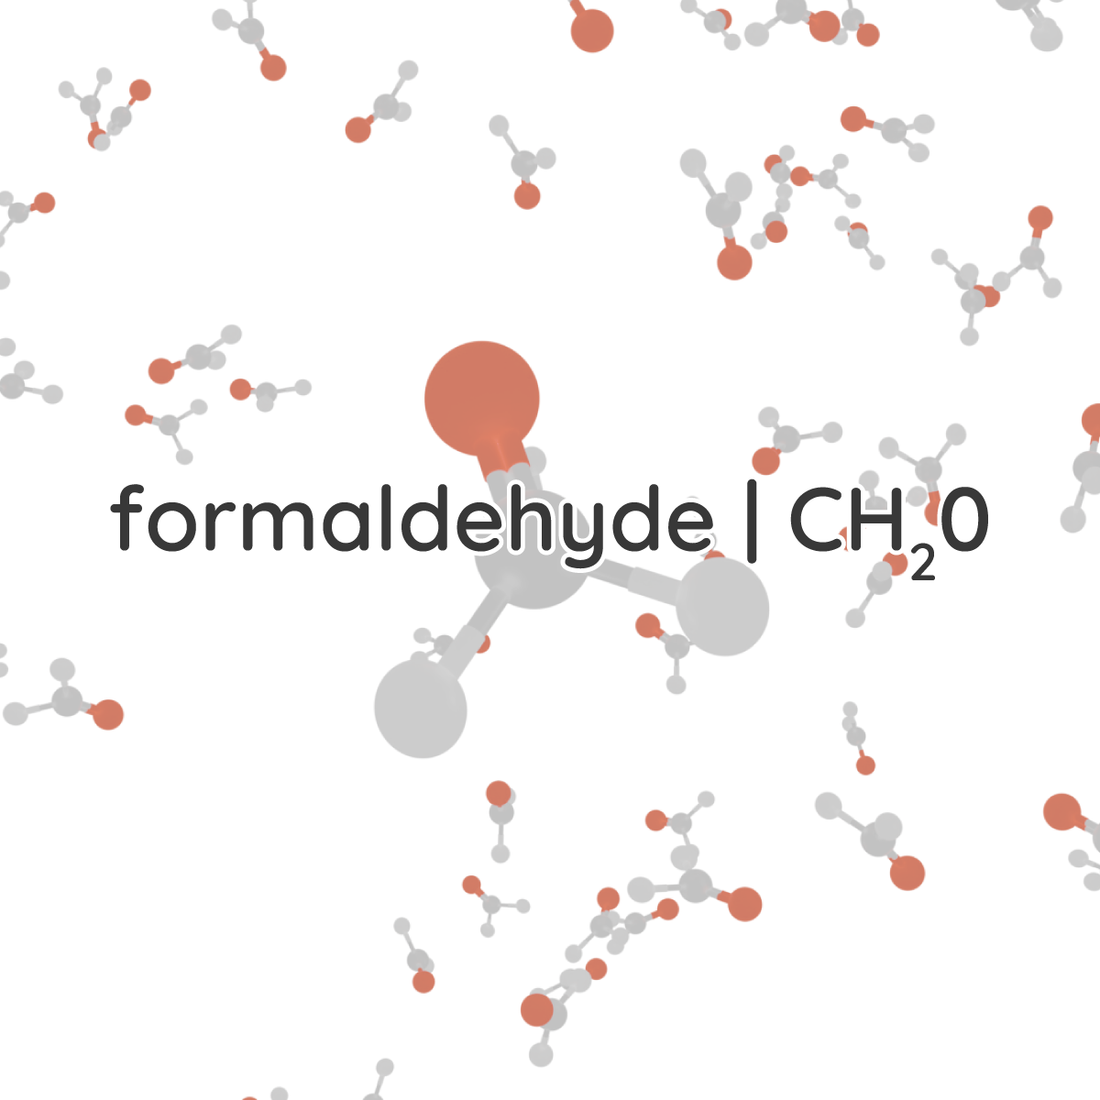 How to remove formaldehyde?